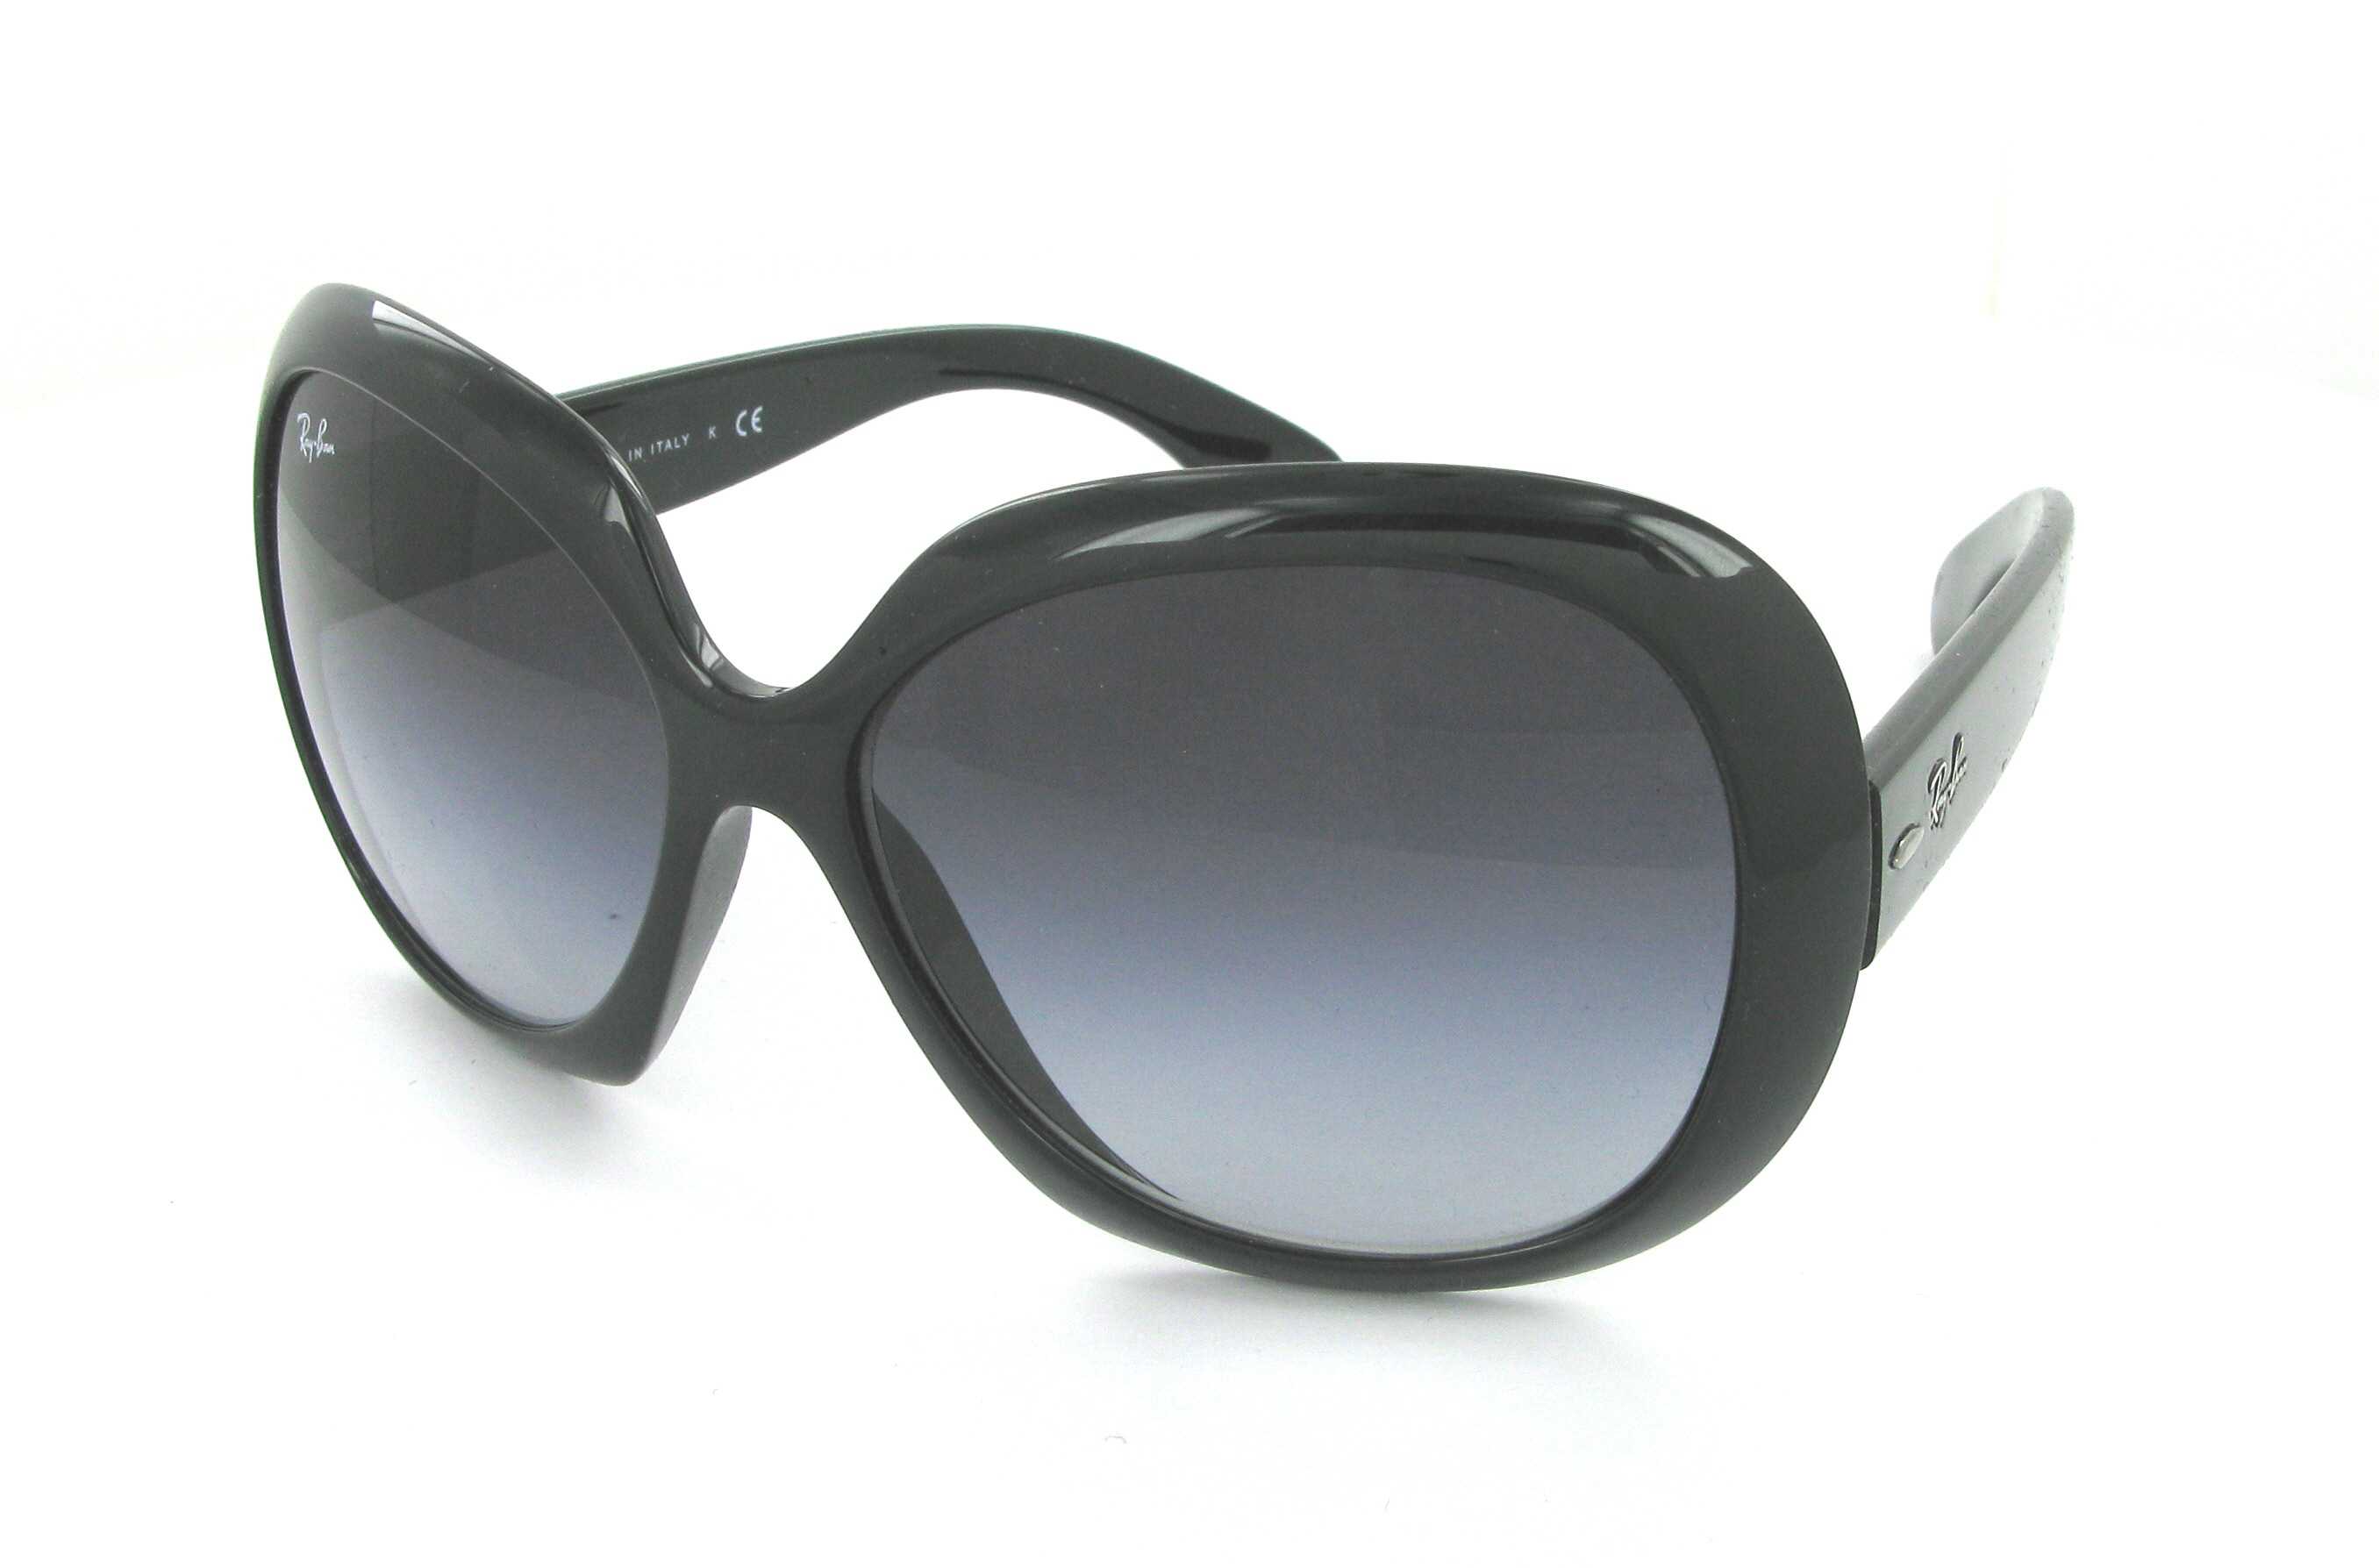 Sunglasses RAY-BAN RB 4098 601/8G JACKIE OHH II 60/14 Woman noire Round  Full Frame Glasses trendy 60mmx14mm 133$CA